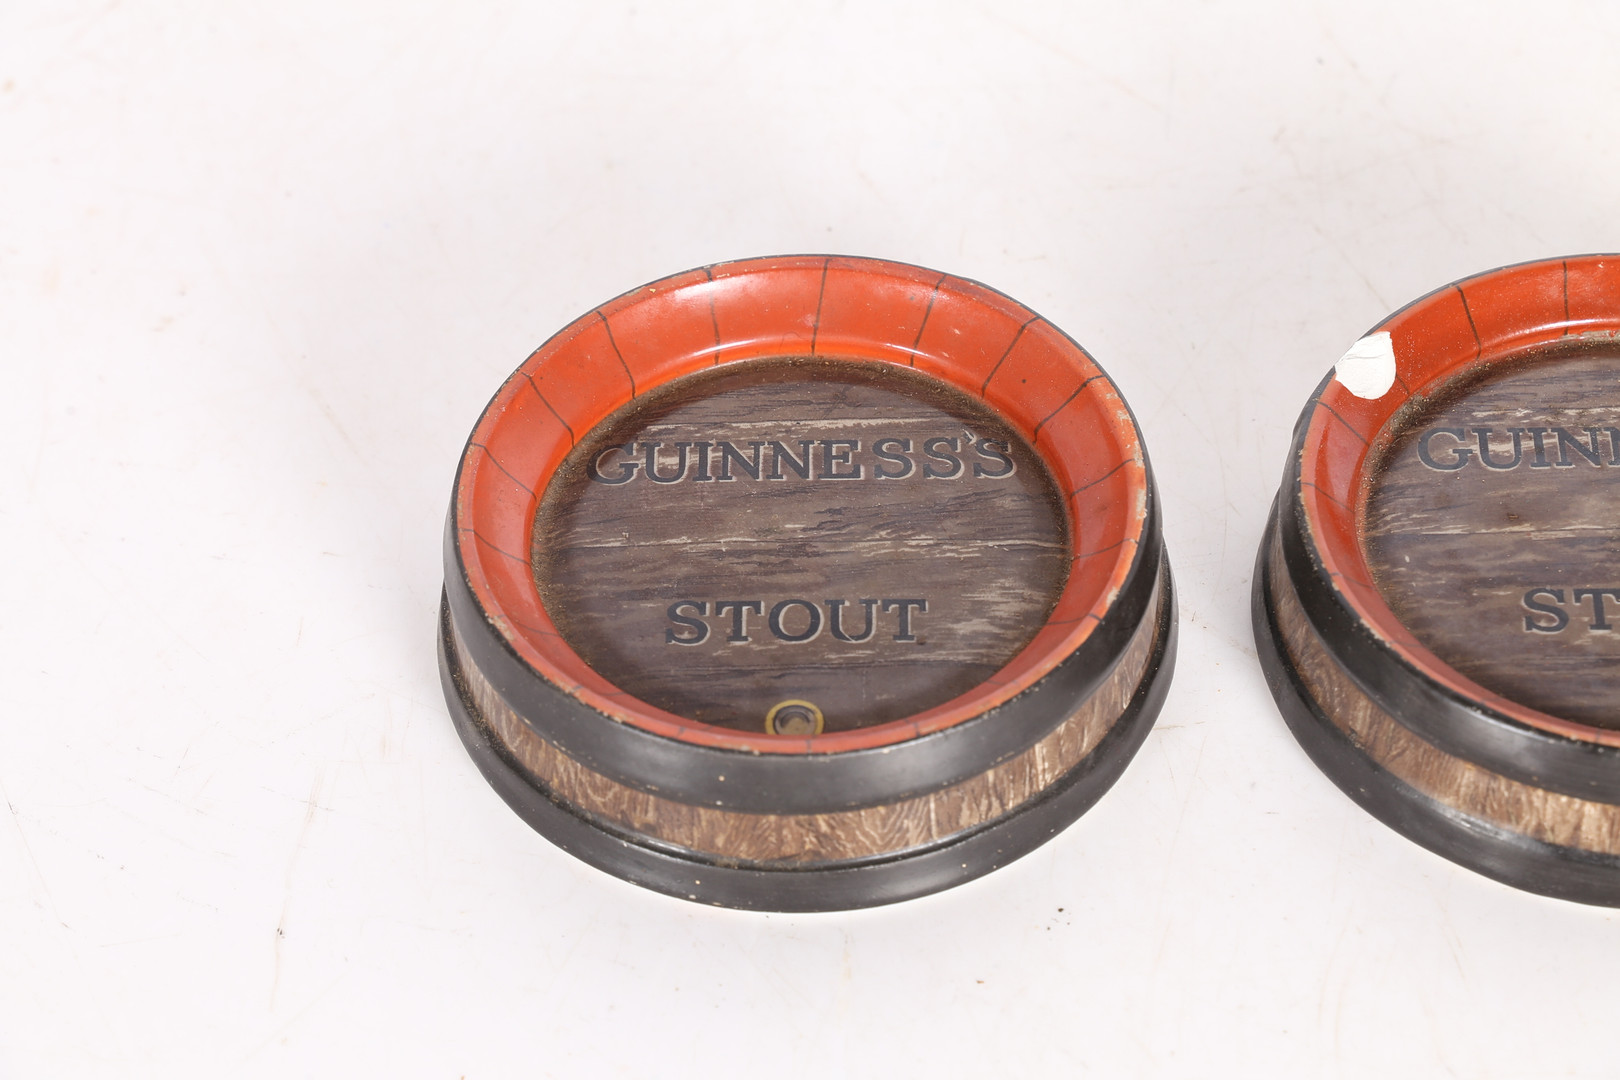 A PAIR OF GUINNESS STOUT ASHTRAYS. - Image 2 of 5